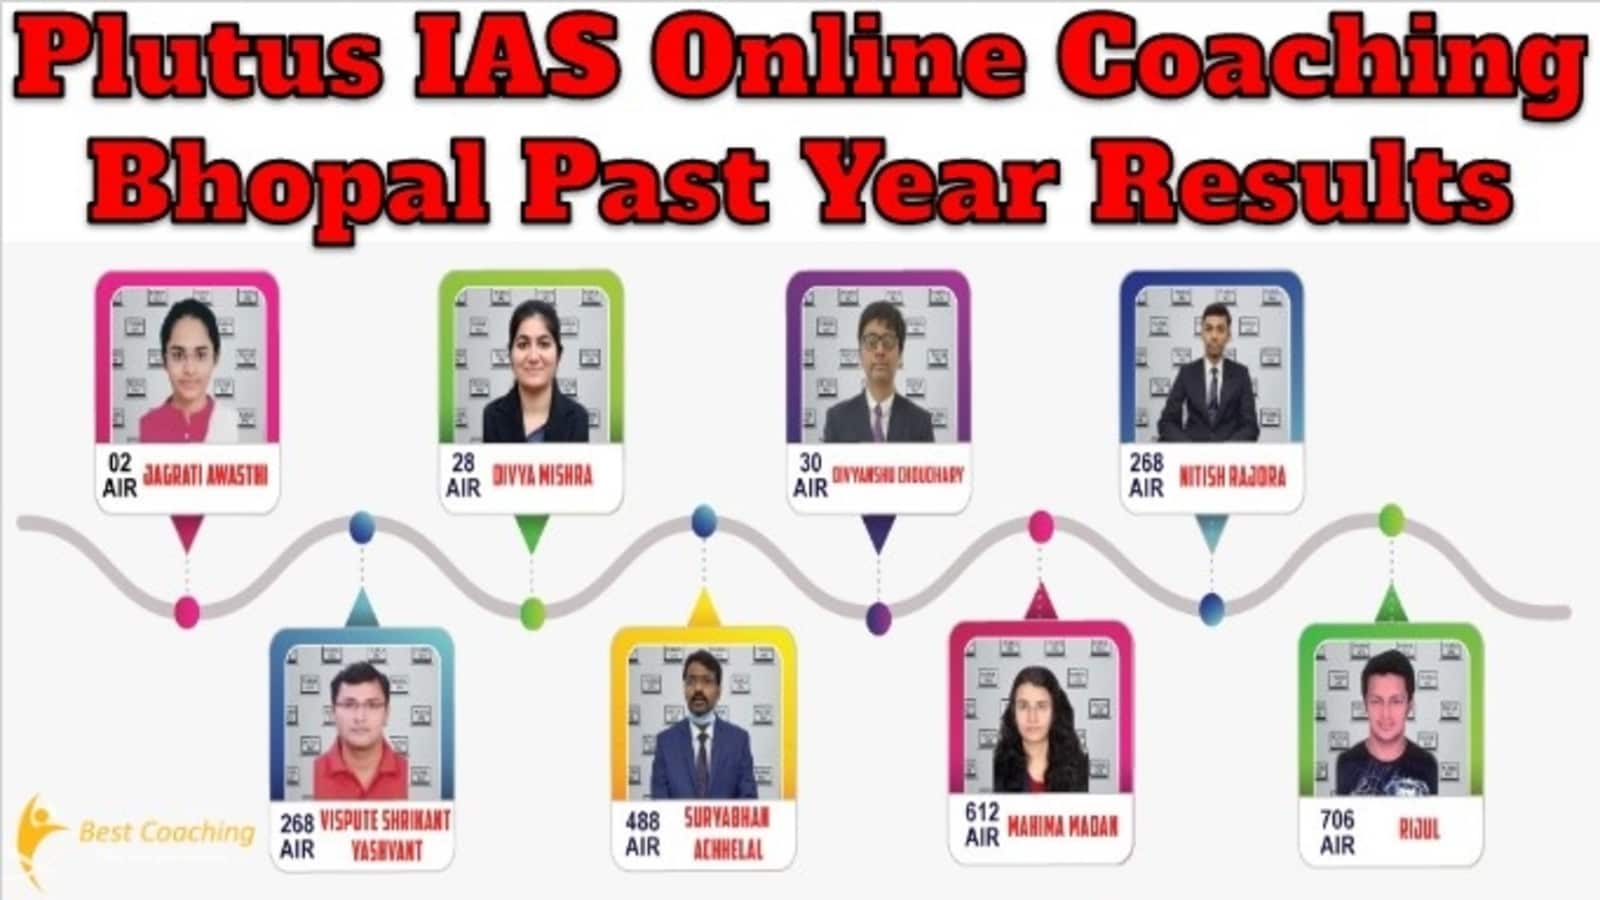 Plutus IAS Online Coaching Bhopal Past Year Results